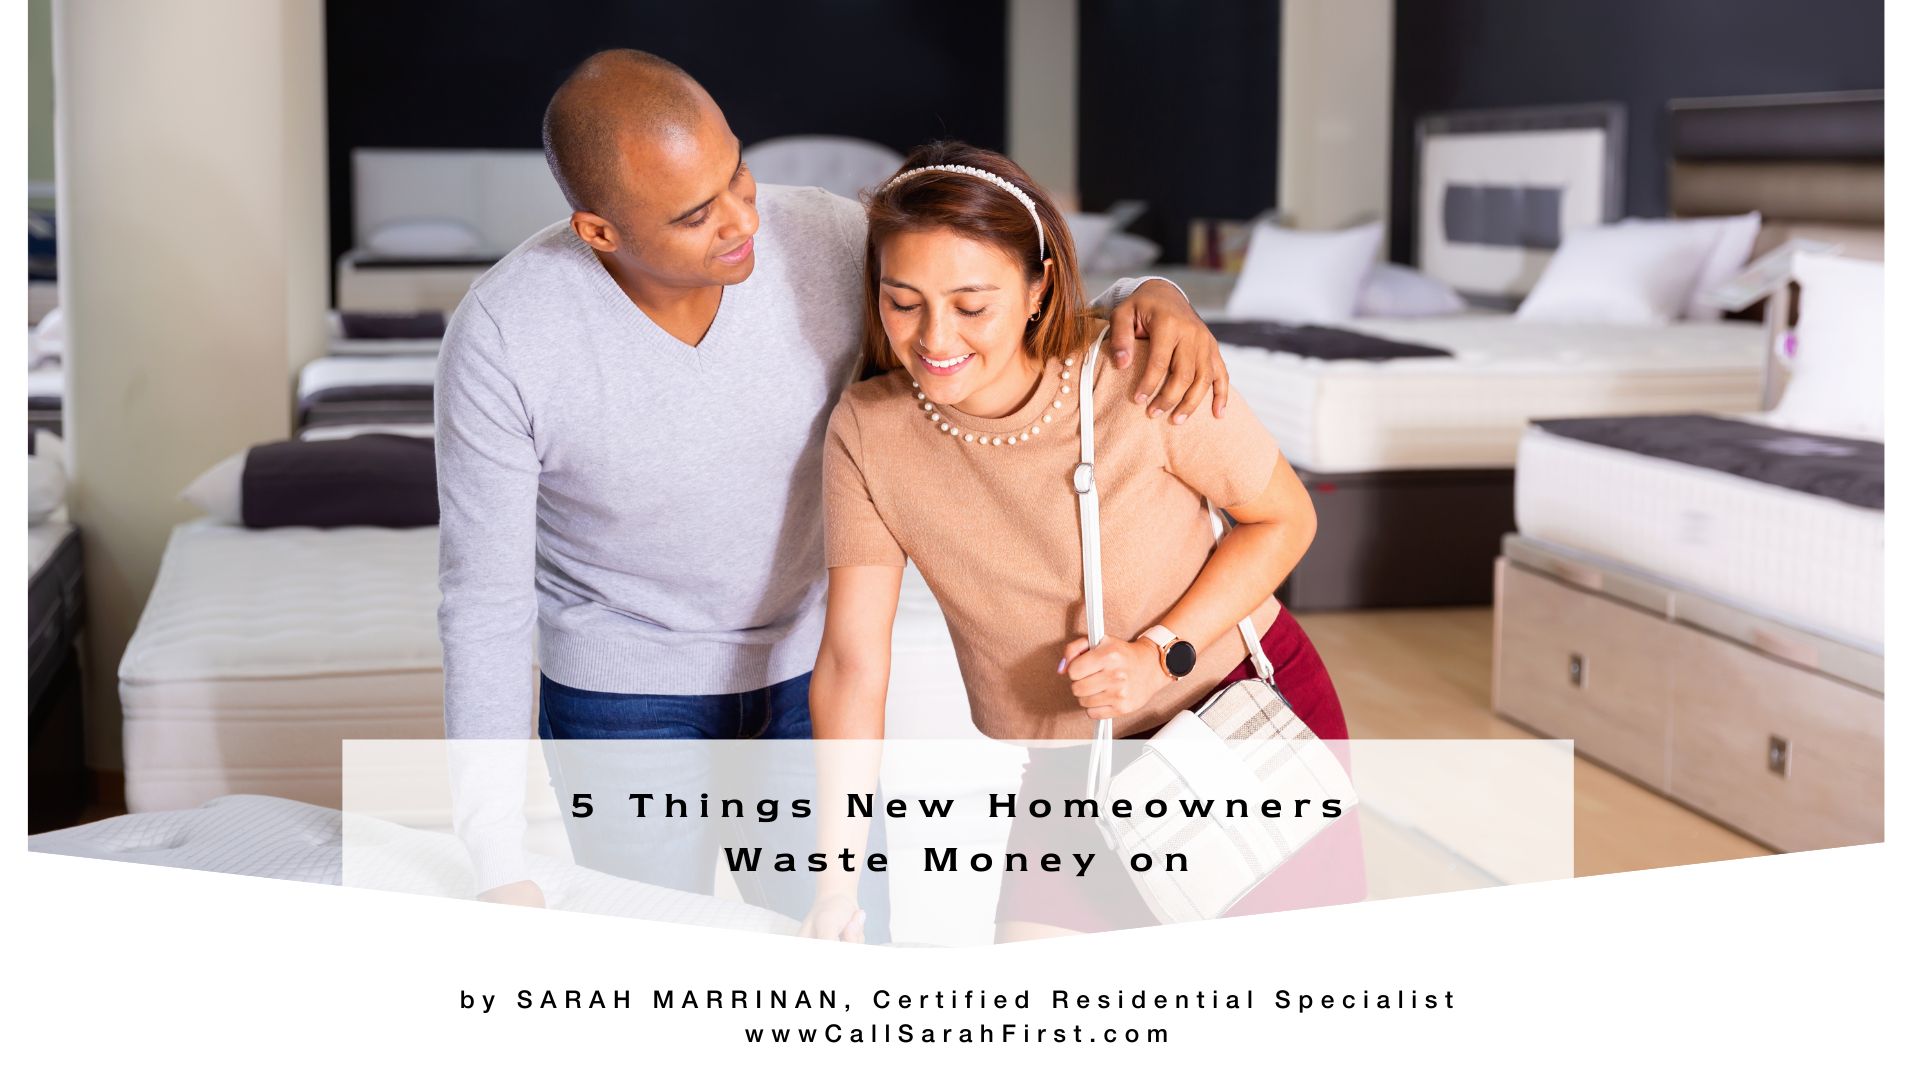 5 Things New Homeowners Waste Money on